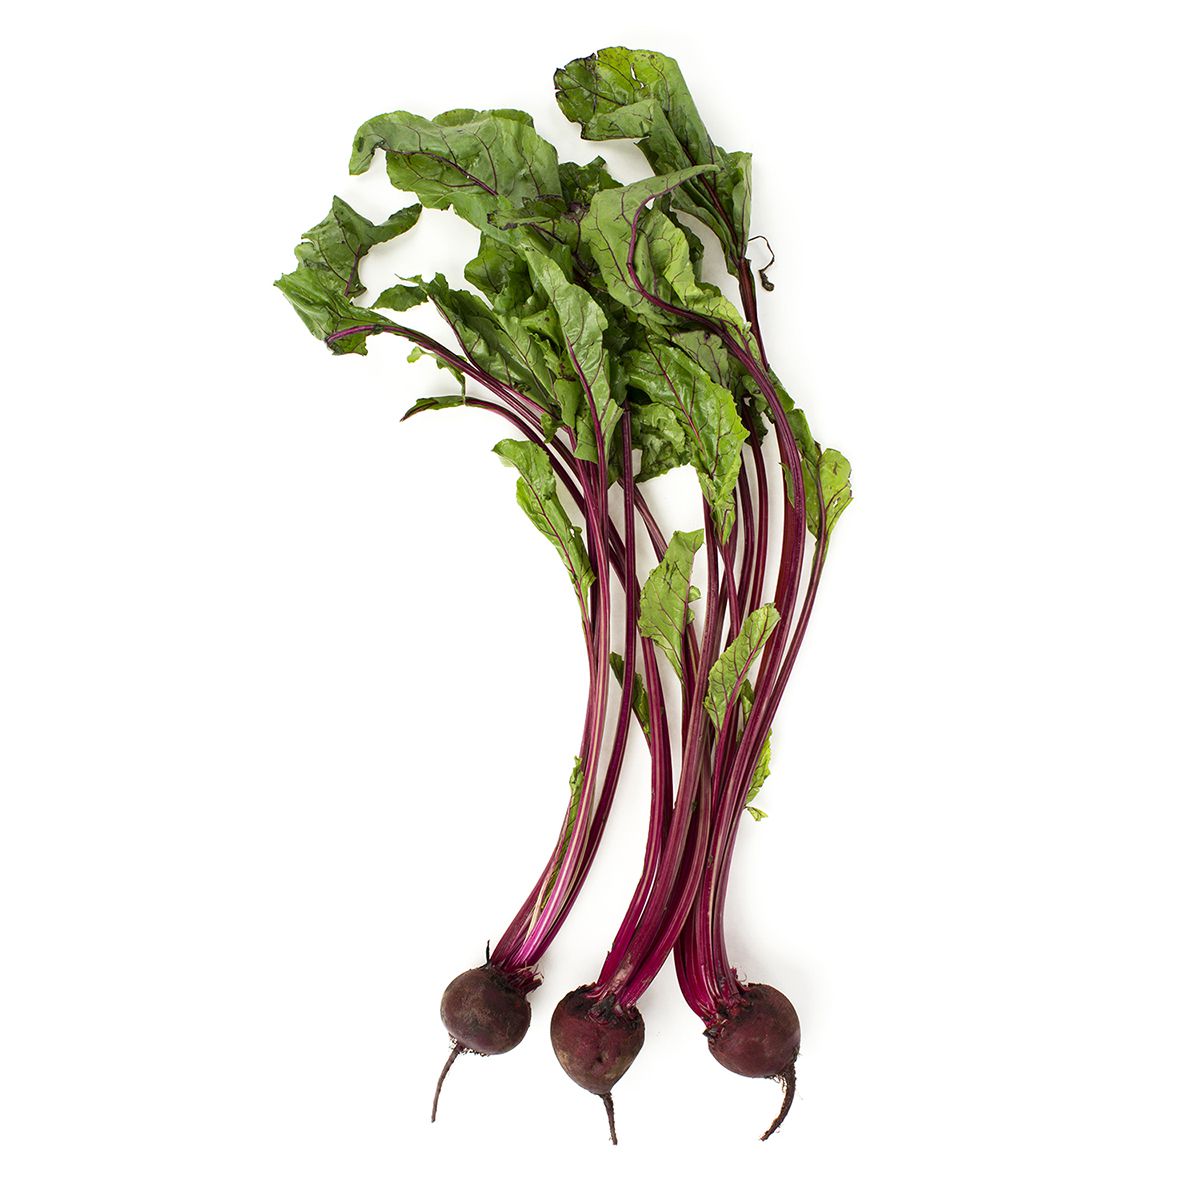 BoxNCase Organic Red Beets